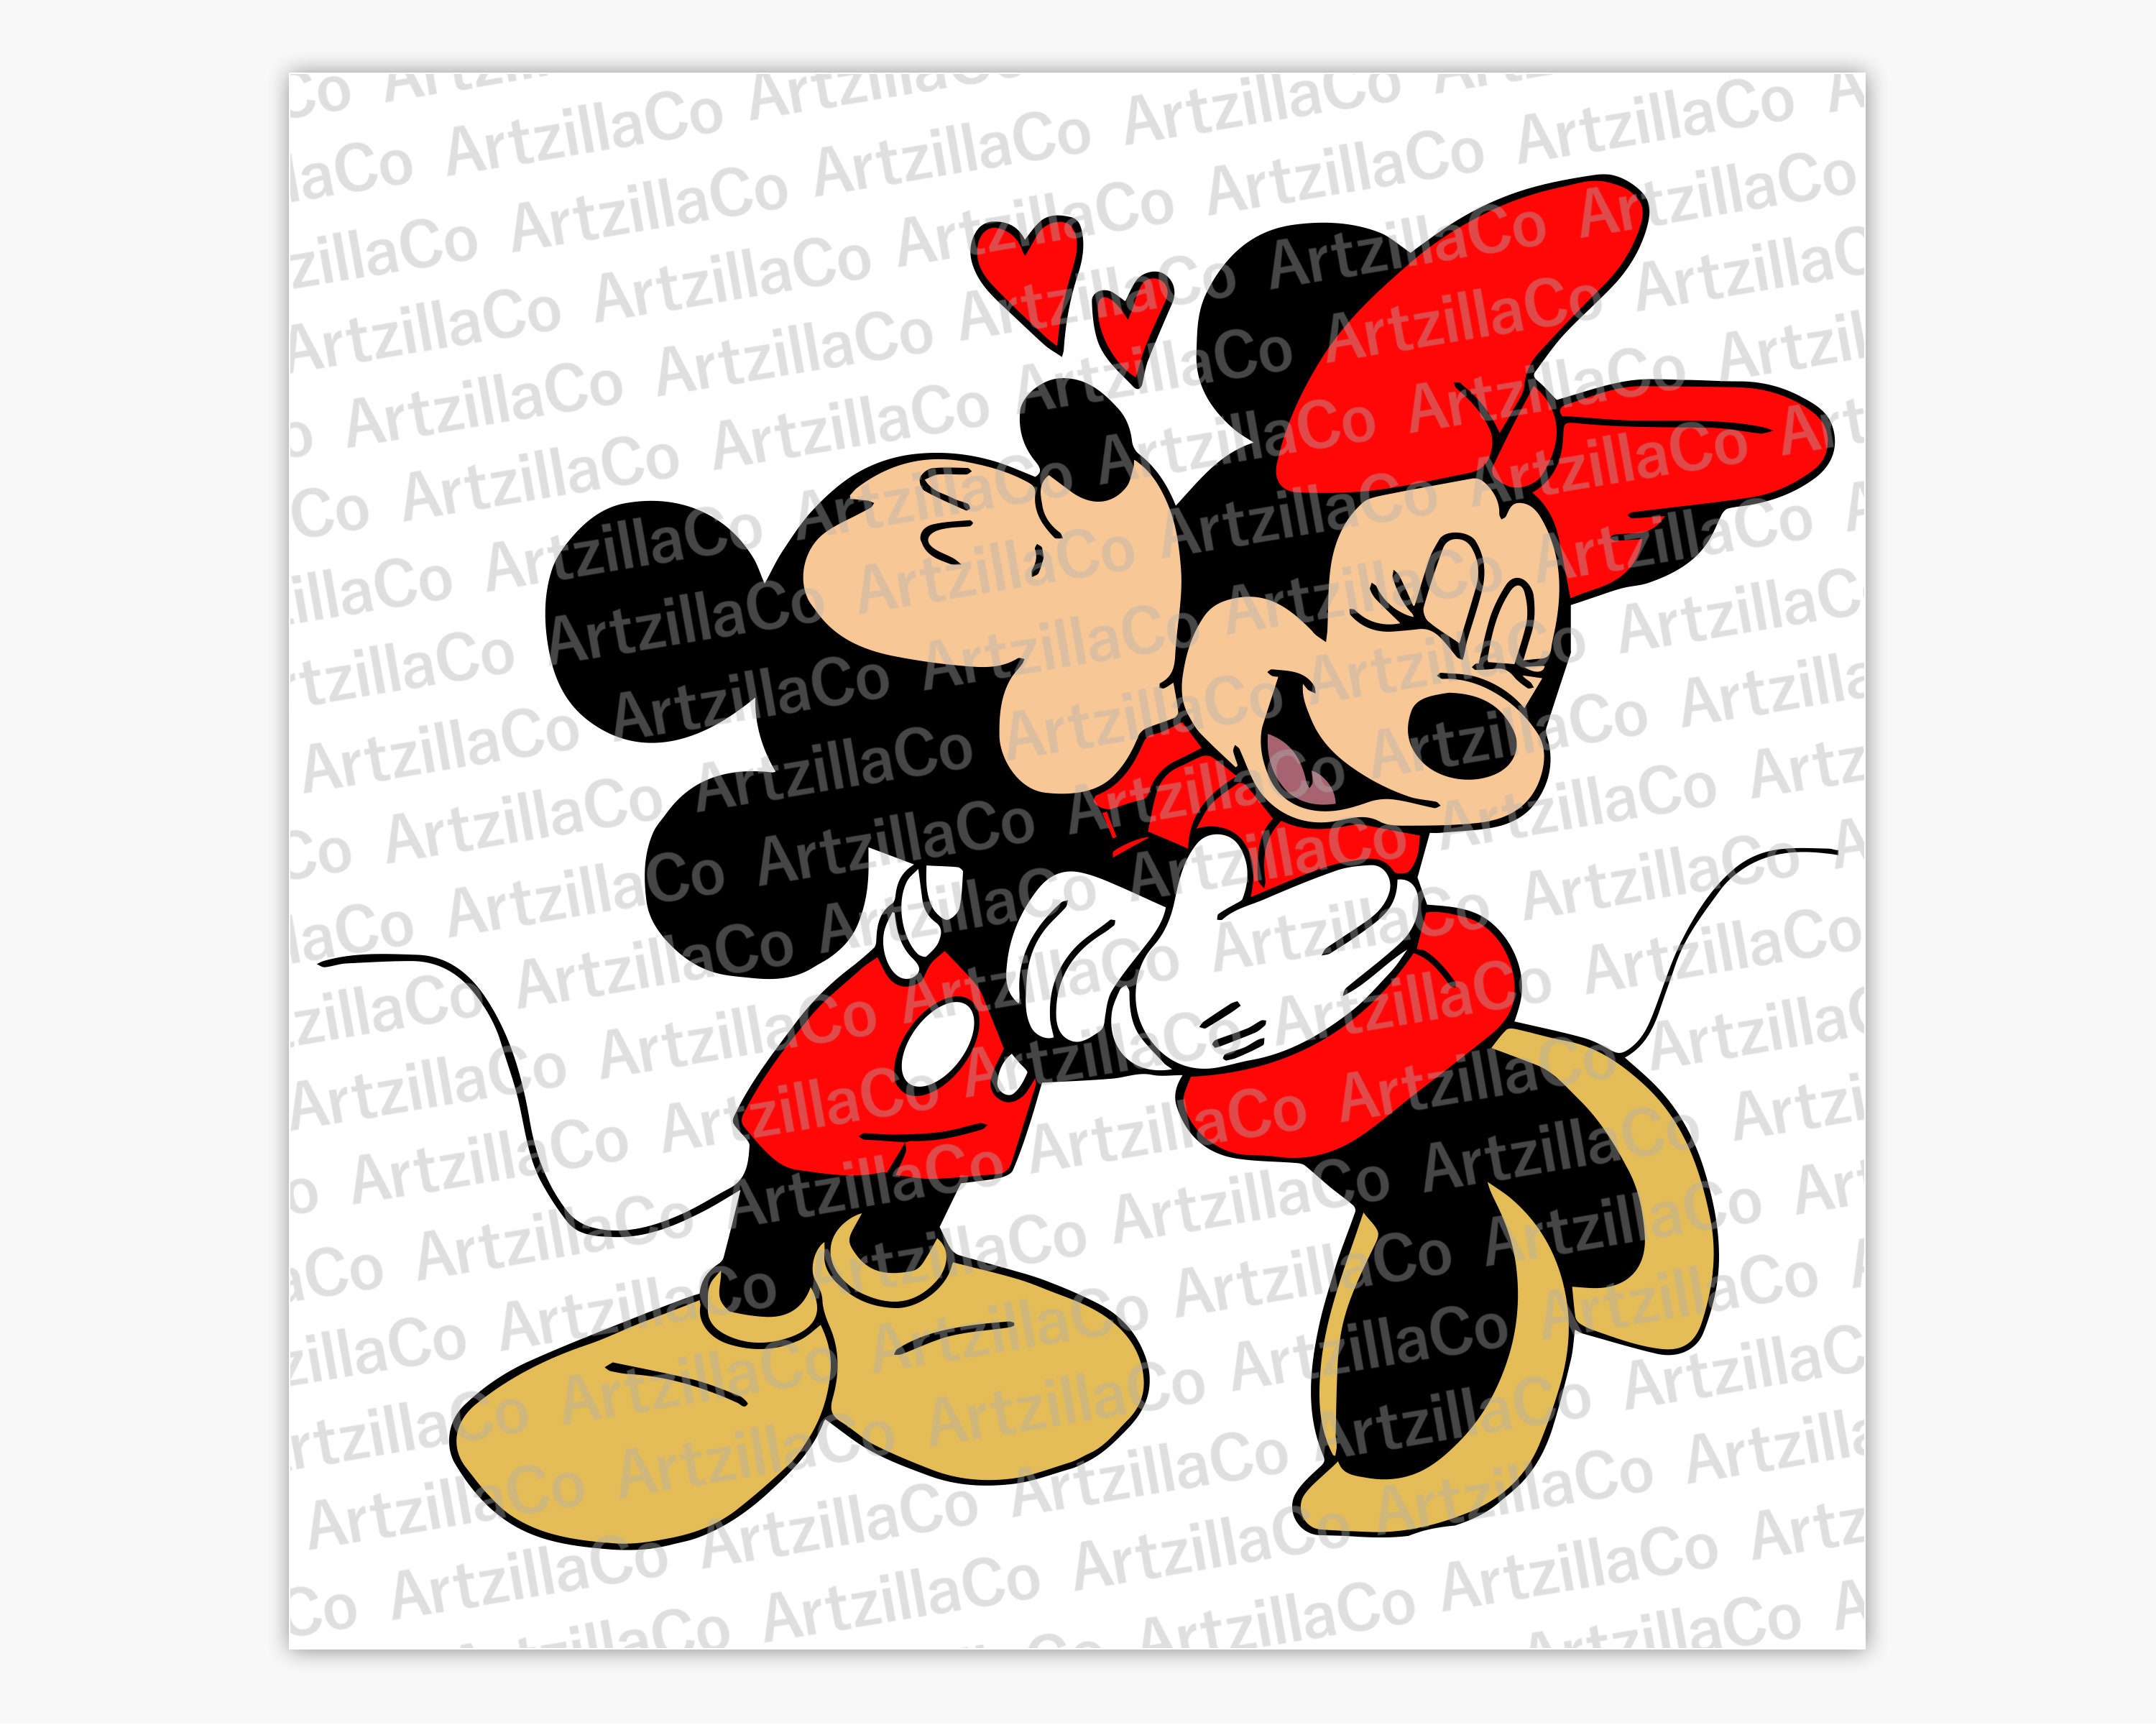 Mickey and Minnie Kissing Iron on Patch Mickey and Minnie 